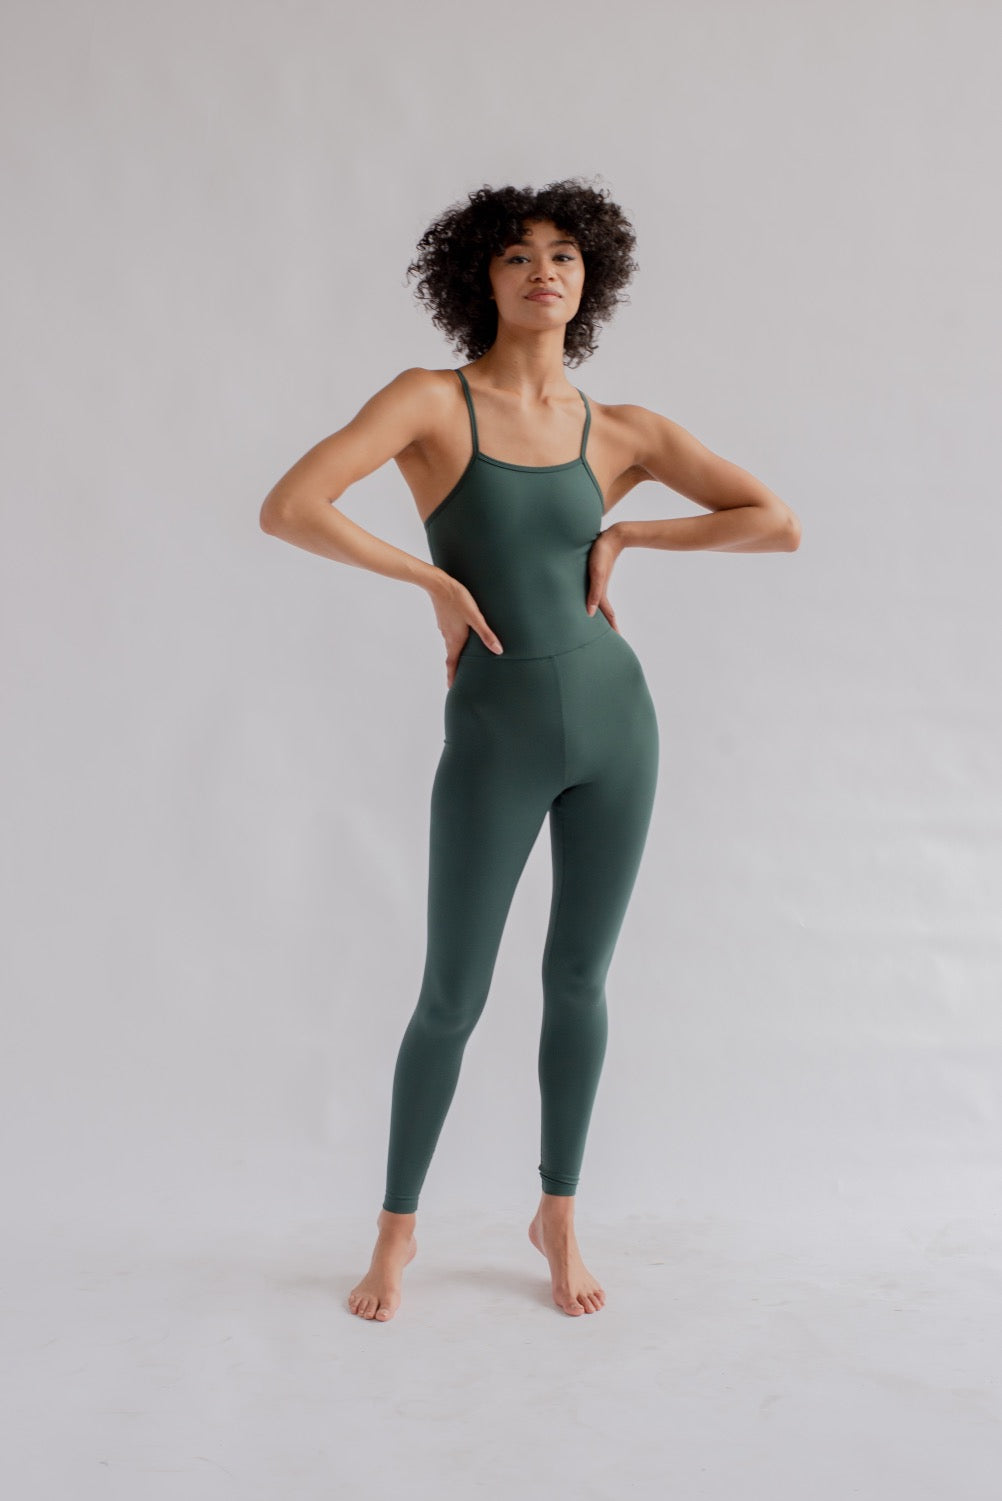 Girlfriend Collective Training & Yoga Unitard - Made from recycled plastic bottles Moss Onepieces